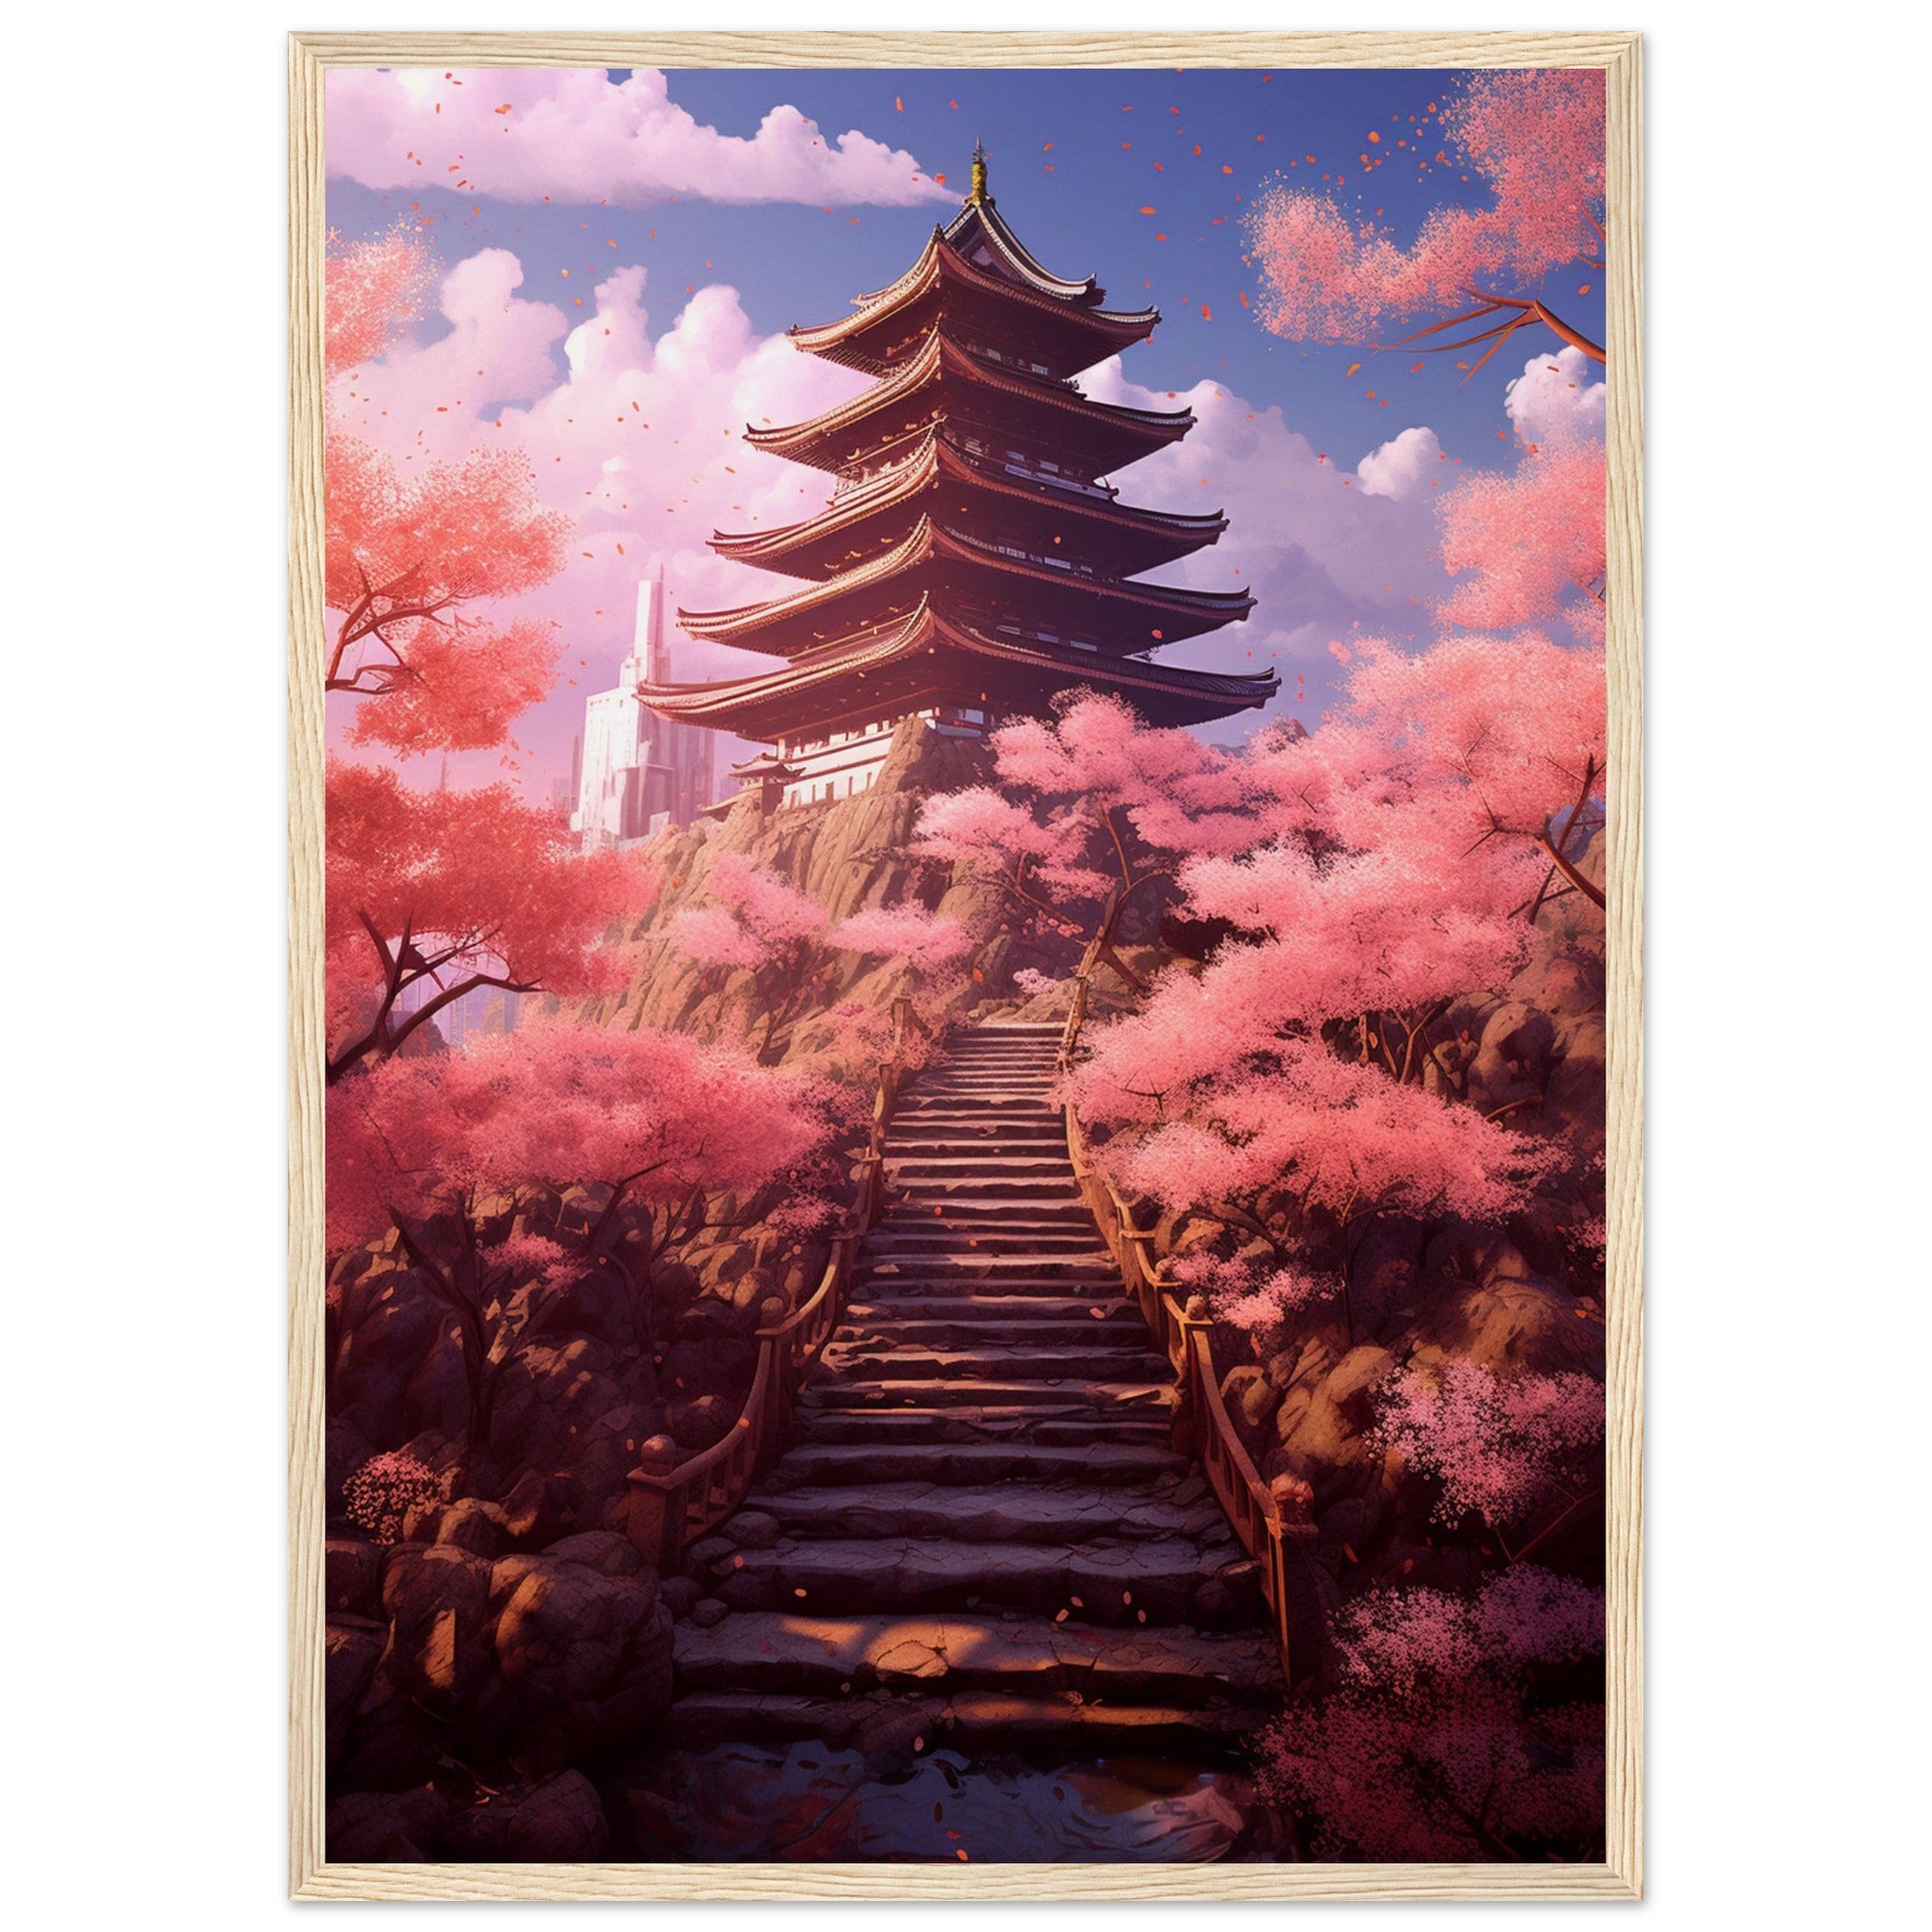 Stairs to a Japanese temple - immersiarts